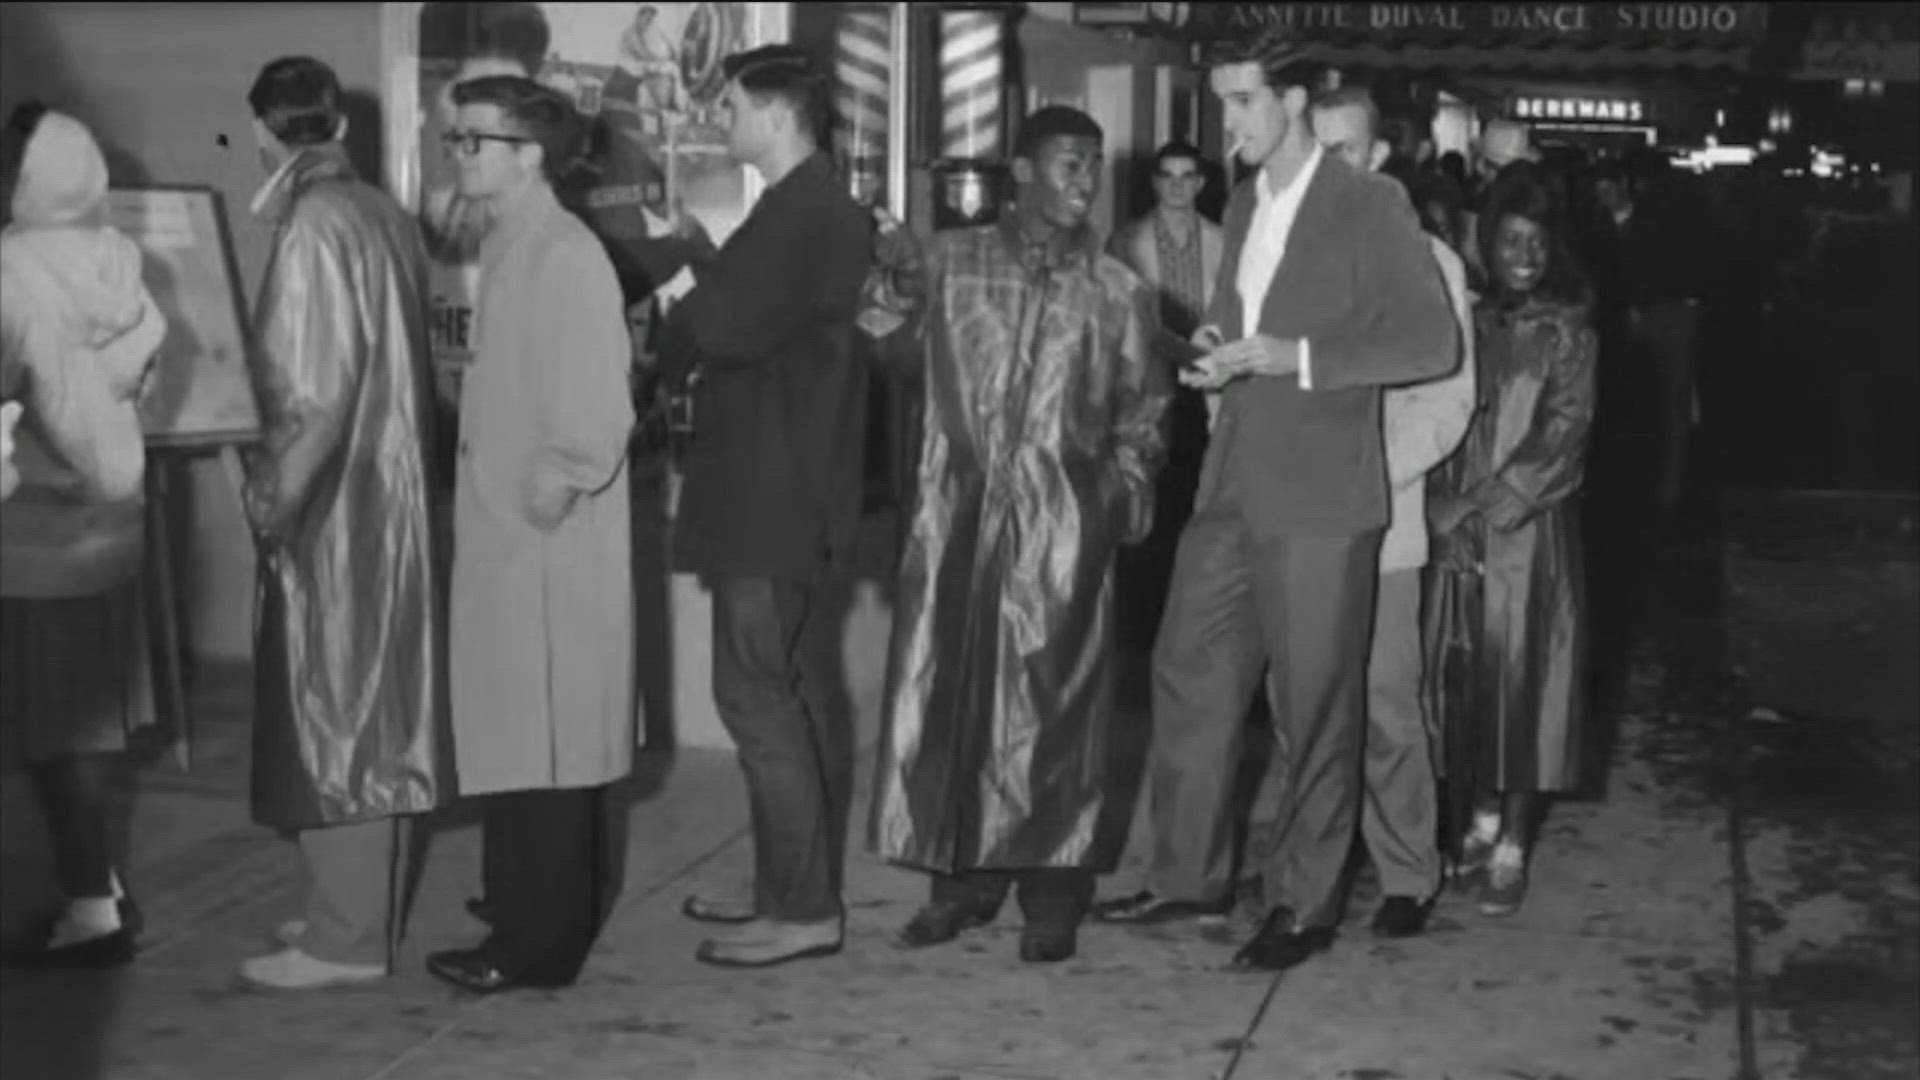 Sixty-four years ago this spring, students used a prank to force white-only movie theaters to open their doors to Black Austinites.